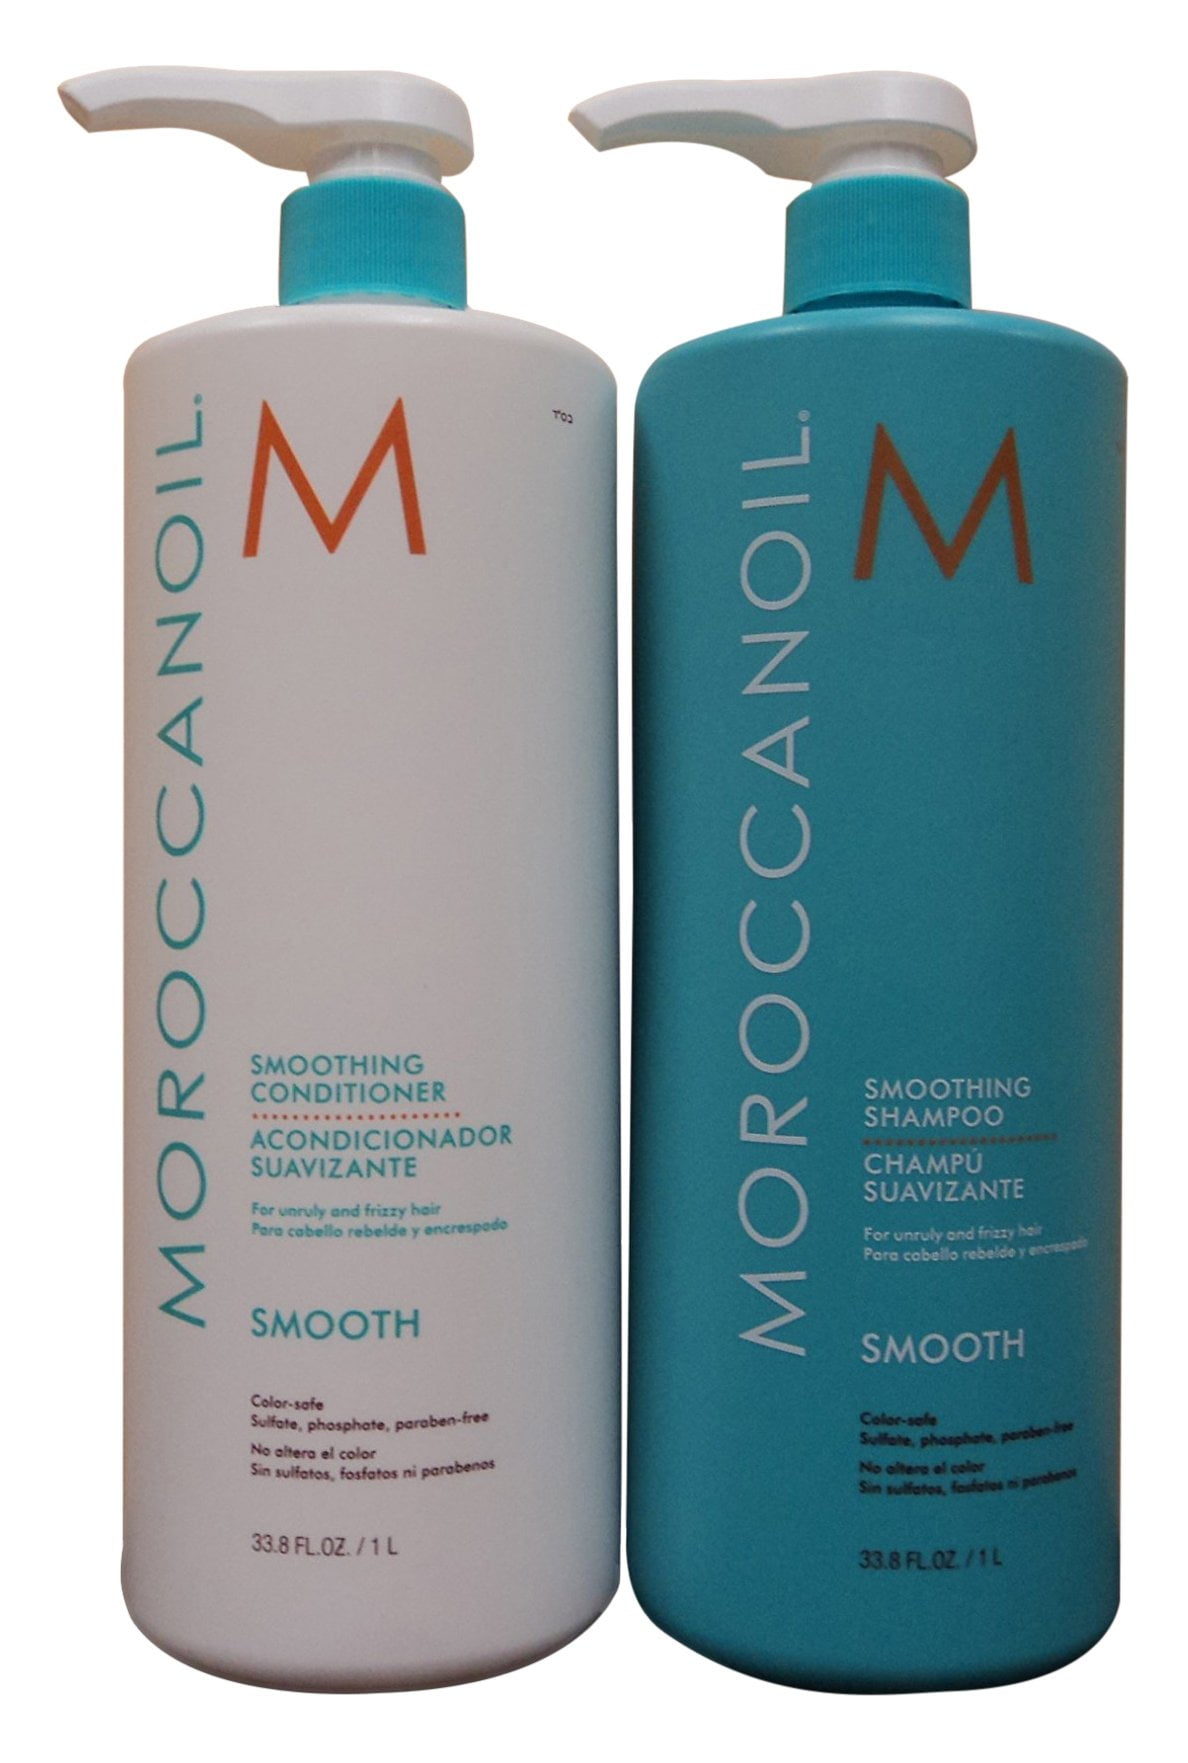 Moroccanoil Smooth Shampoo and Conditioner (33.8 fl. oz Each)